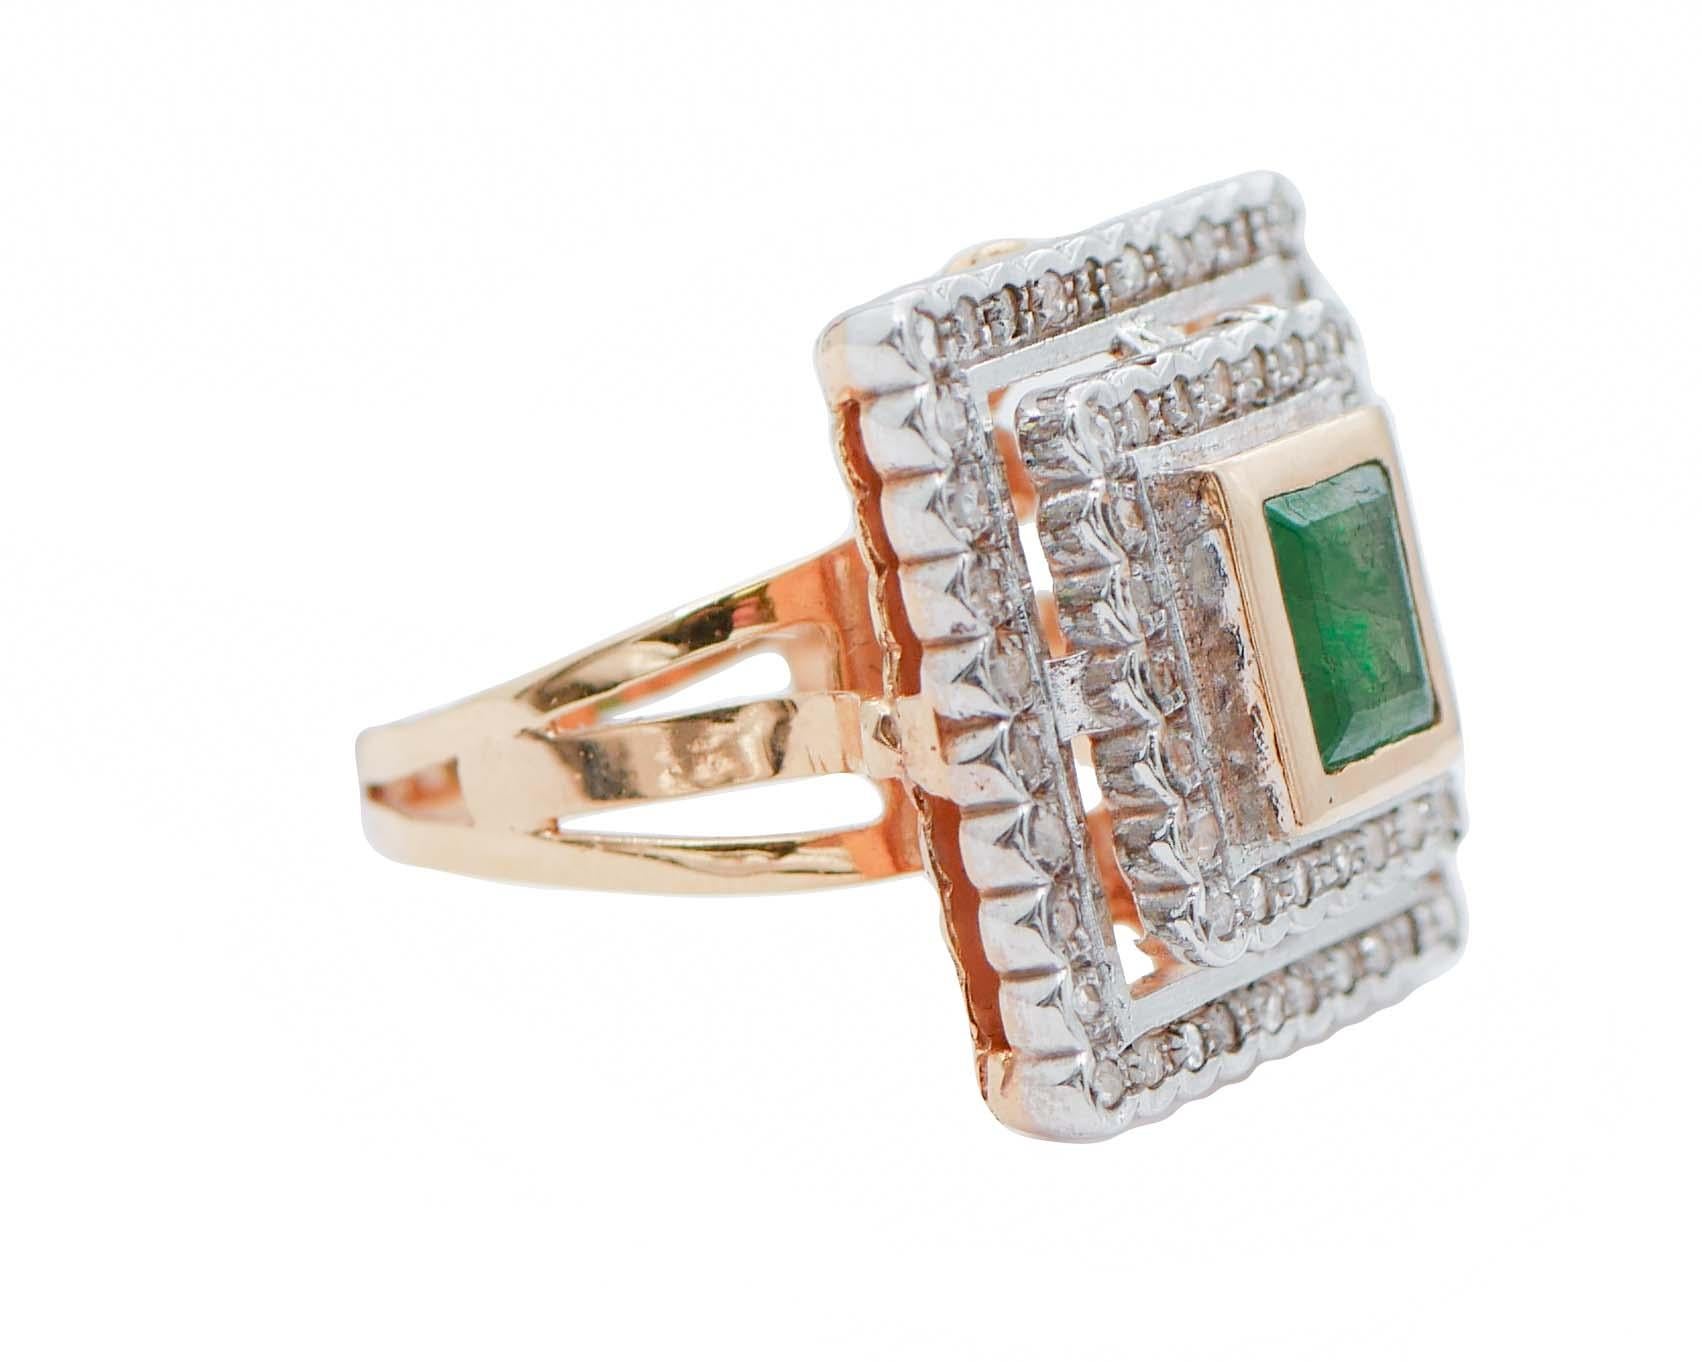 SHIPPING POLICY: 
No additional costs will be added to this order. 
Shipping costs will be totally covered by the seller (customs duties included).

Fantastic retrò ring in 9 karat rose gold and silver structure mounted with a central emerald